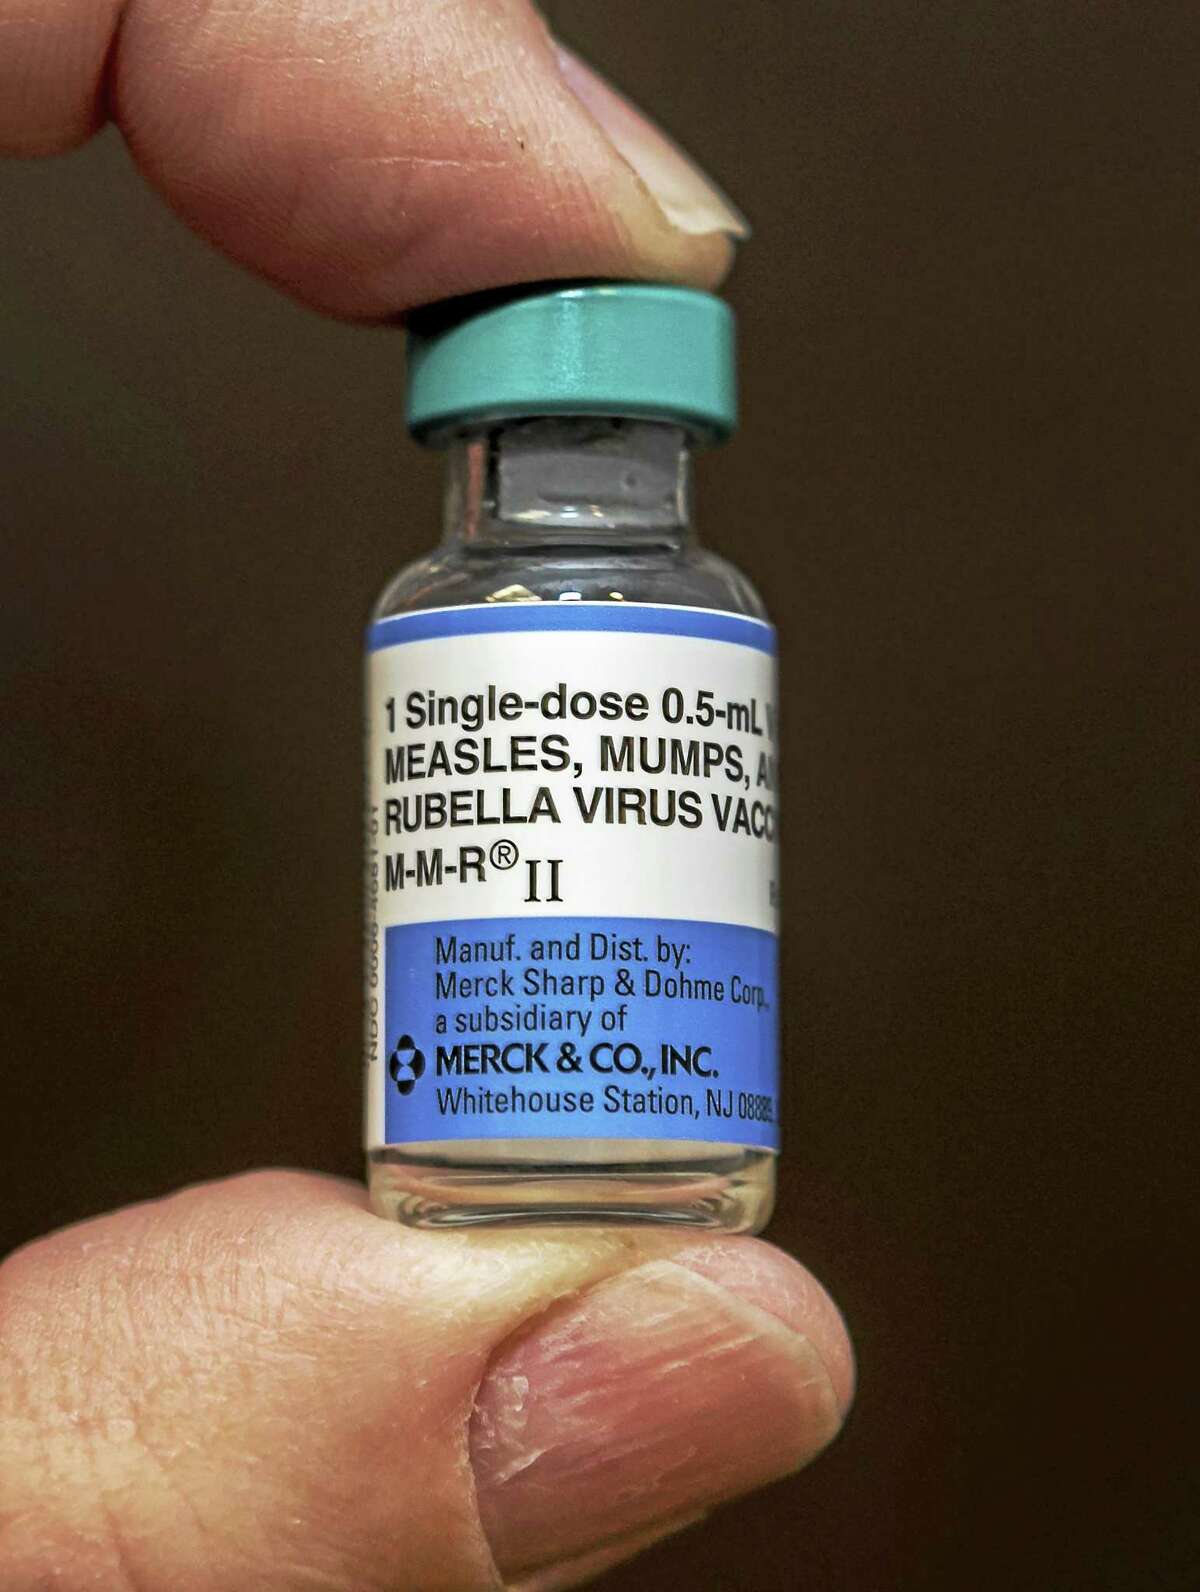 A single-dose vial of the measles-mumps-rubella virus vaccine live, or MMR vaccine is shown at the practice of Dr. Charles Goodman in Northridge, Calif.